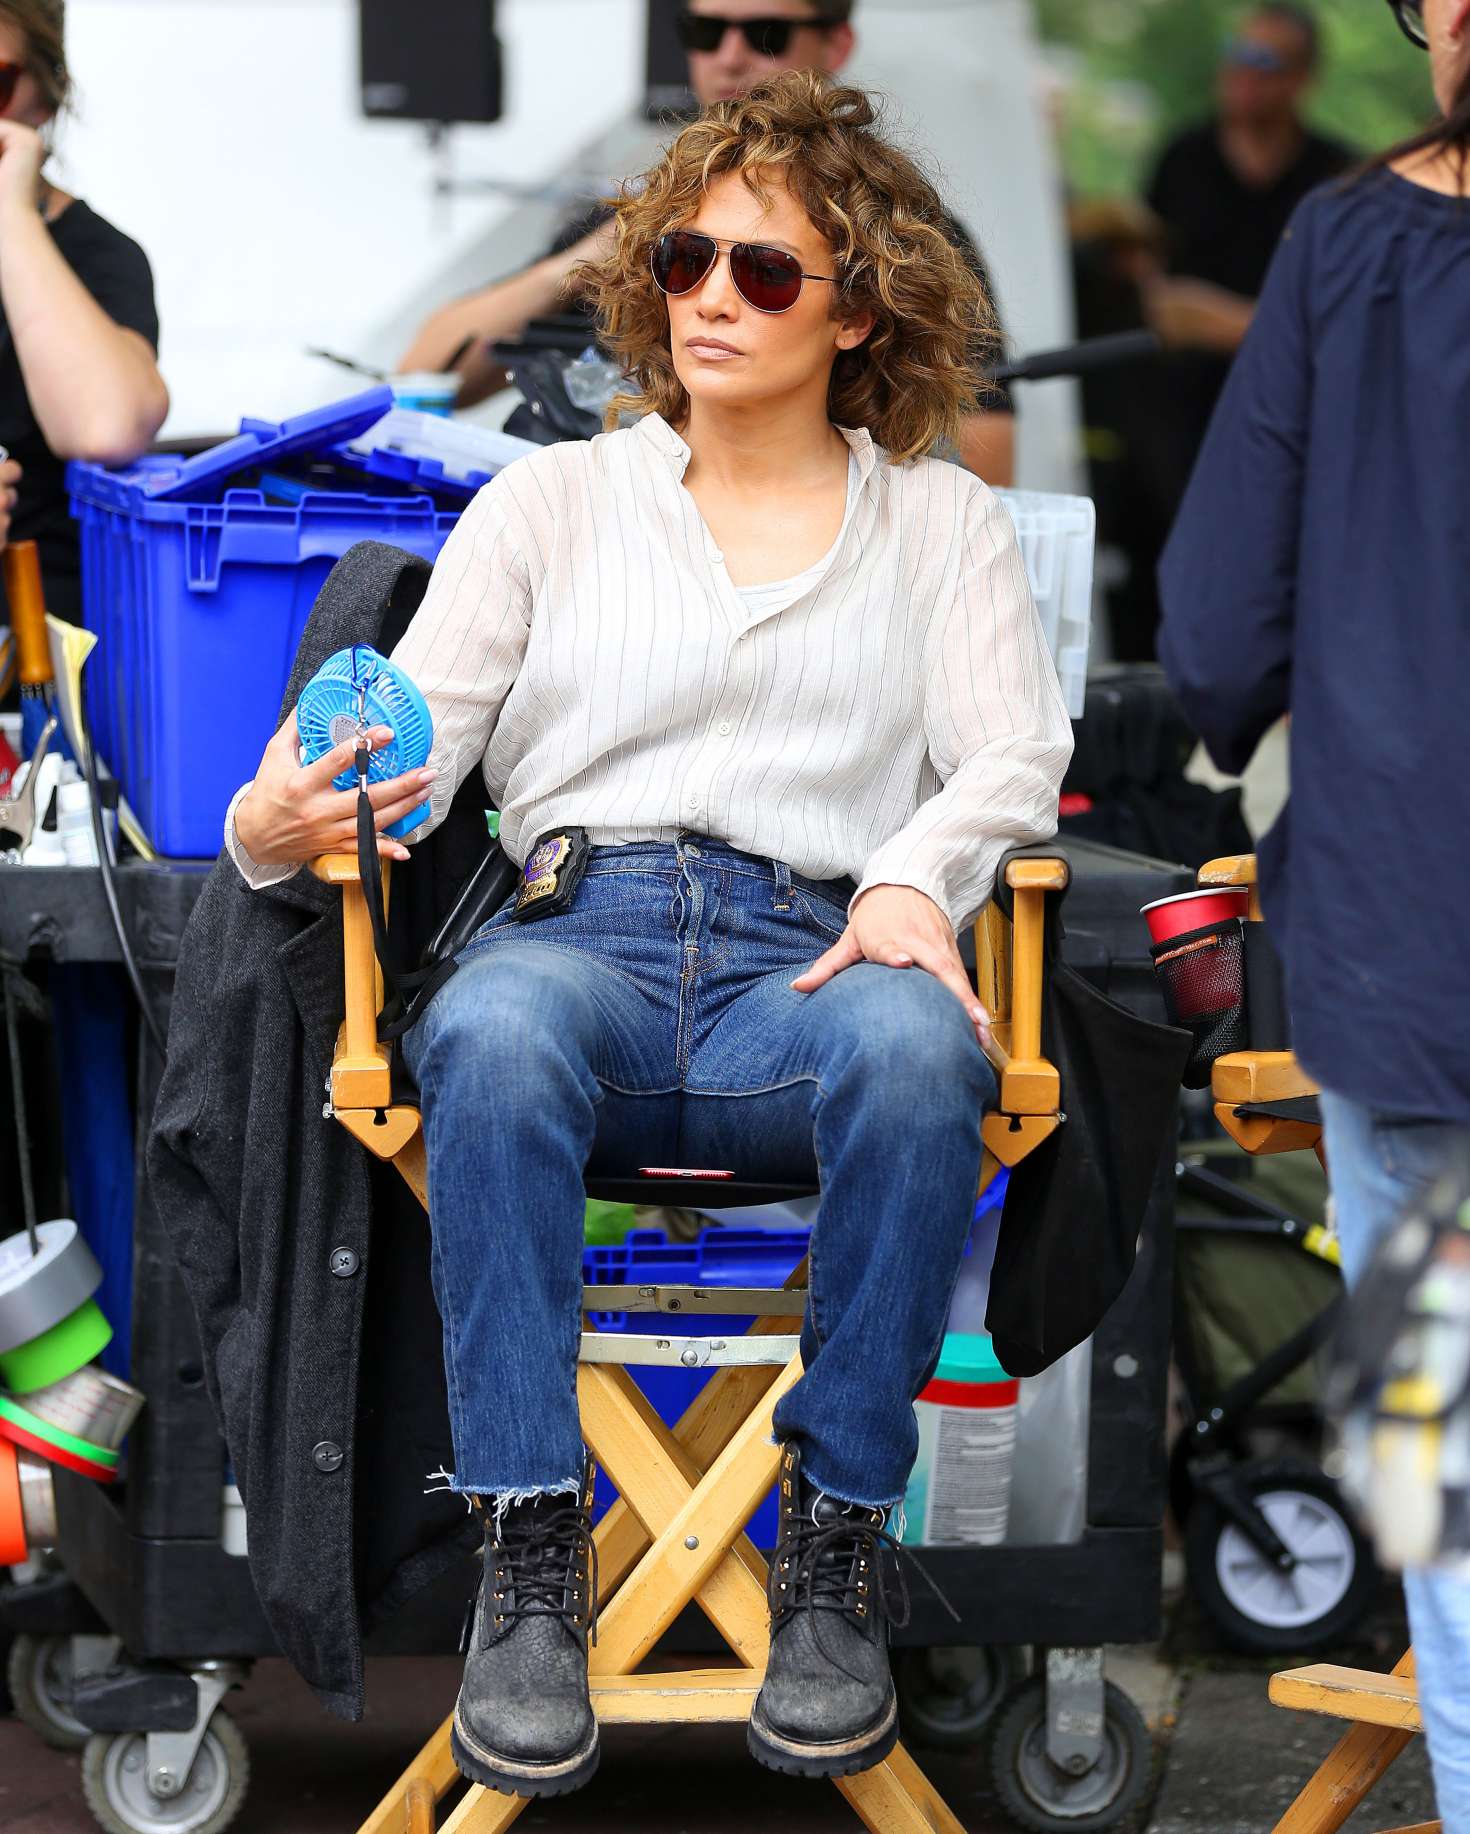 Jennifer Lopez on the set of 'Shades of Blue' in New York City